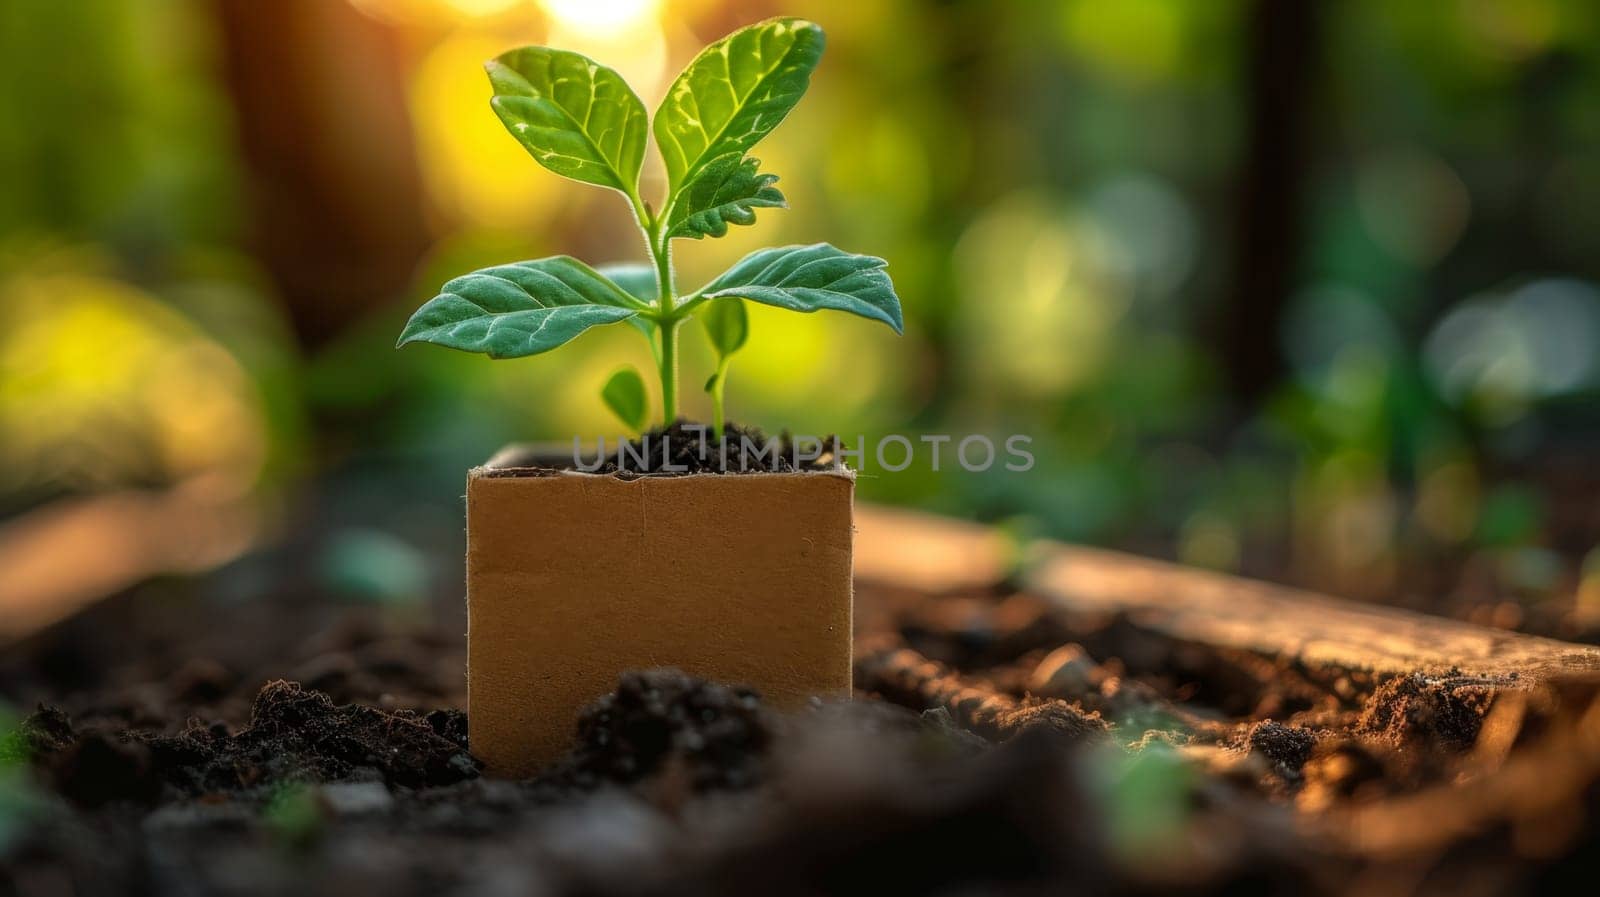 A young green plant in an eco-pot on the ground, a germinating seed in a glass at sunset.